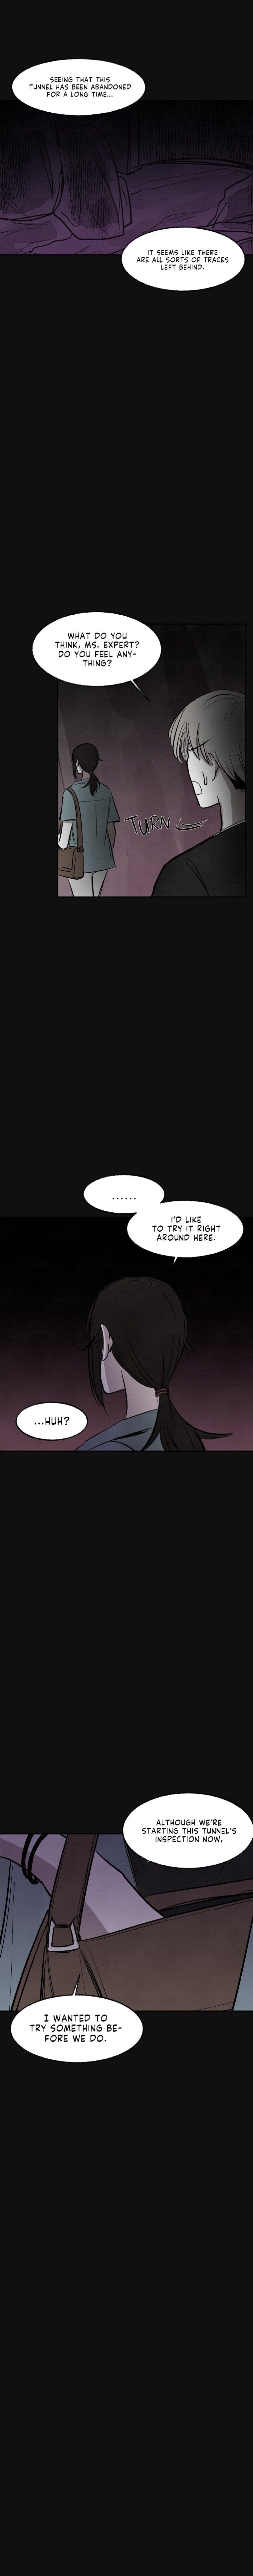 Devil’s Editing Chapter 13 - Page 10